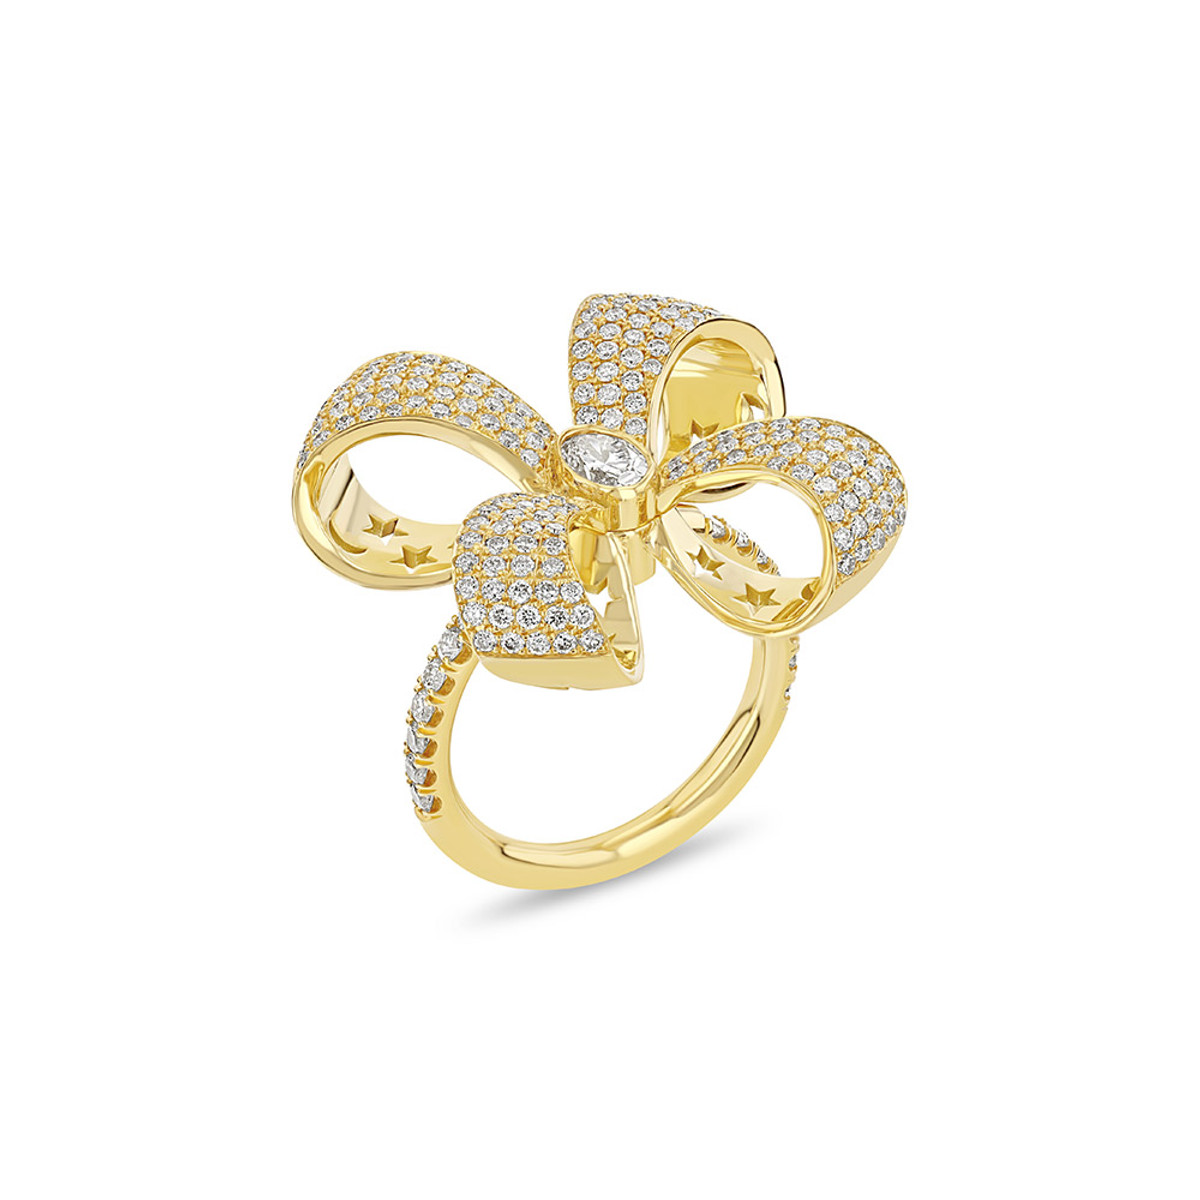 Future Fortune 18K Yellow Gold Bash Ring-55960 Product Image